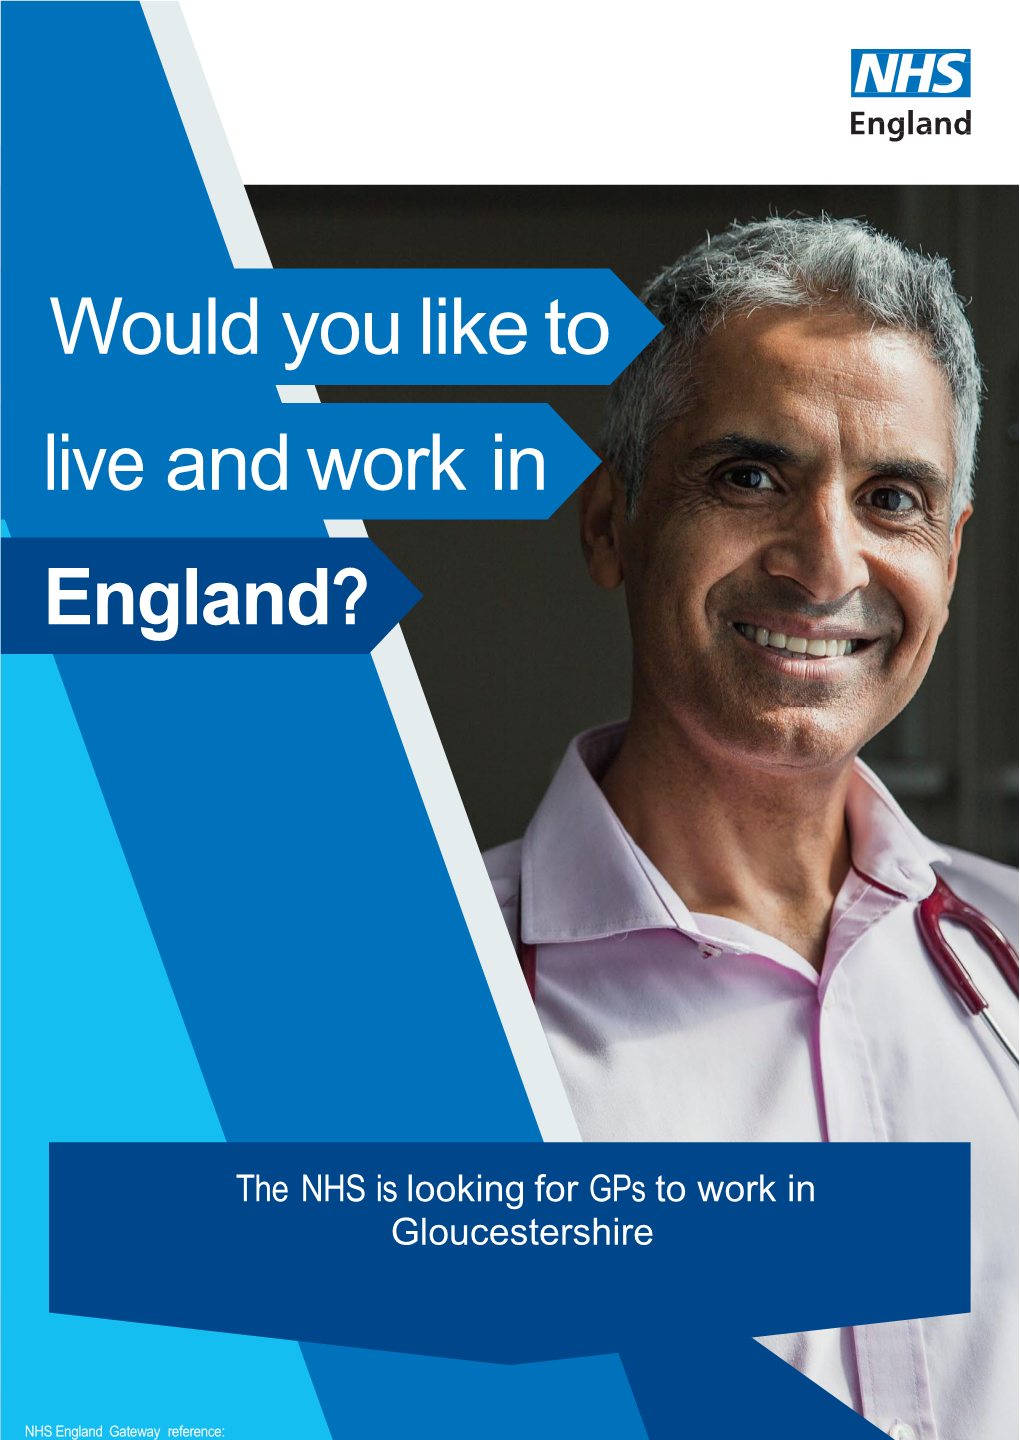 Would You Like to Live and Work in England?